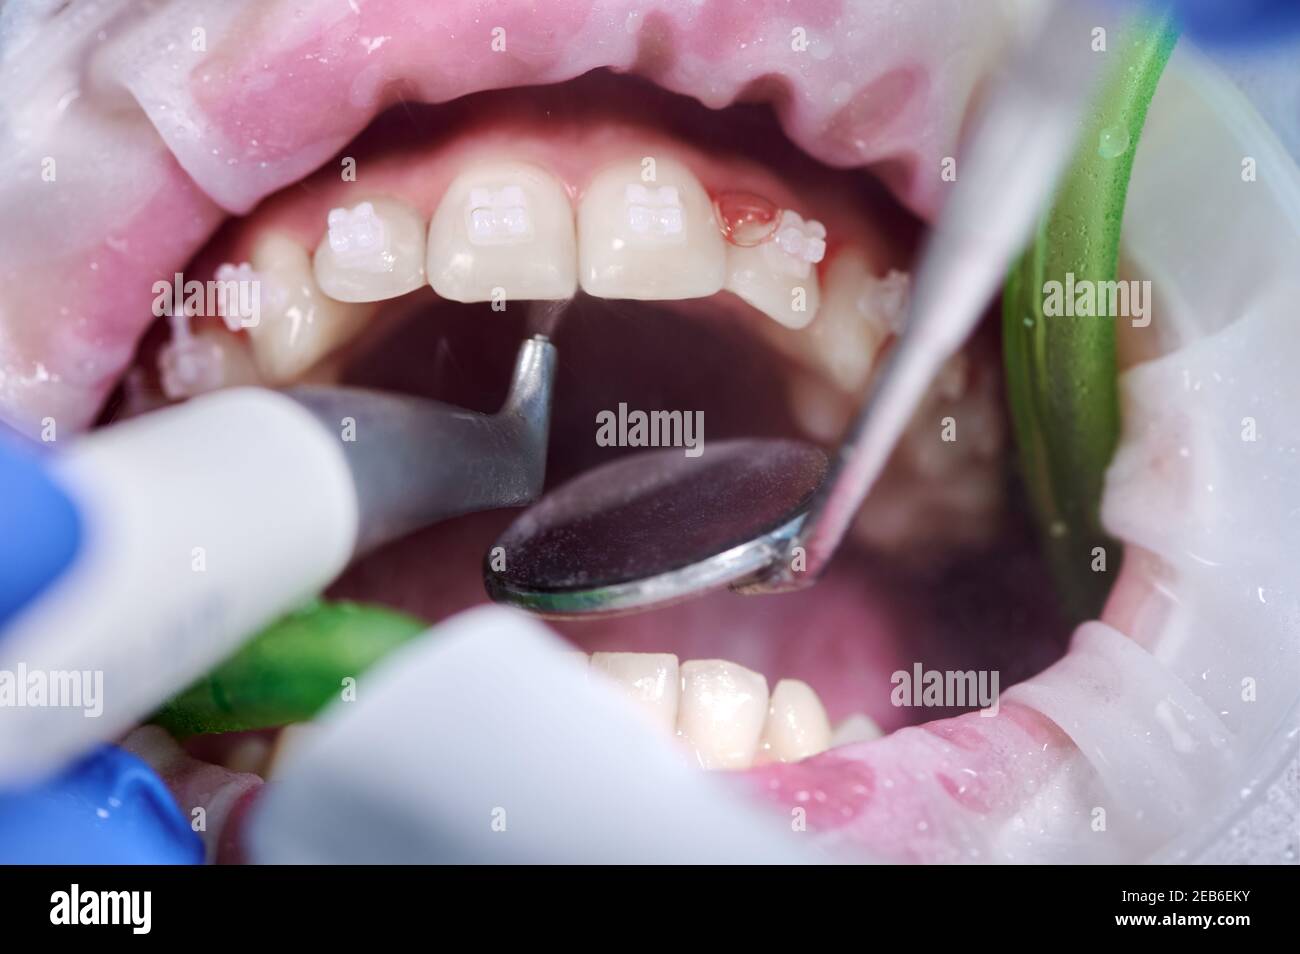 Close up photography. Top view on cleaning process in patient's mouth. Cleaning teeth with water jet and saliva ejector. Cheek retractor on the mouth. Concept of professional dental hygiene Stock Photo